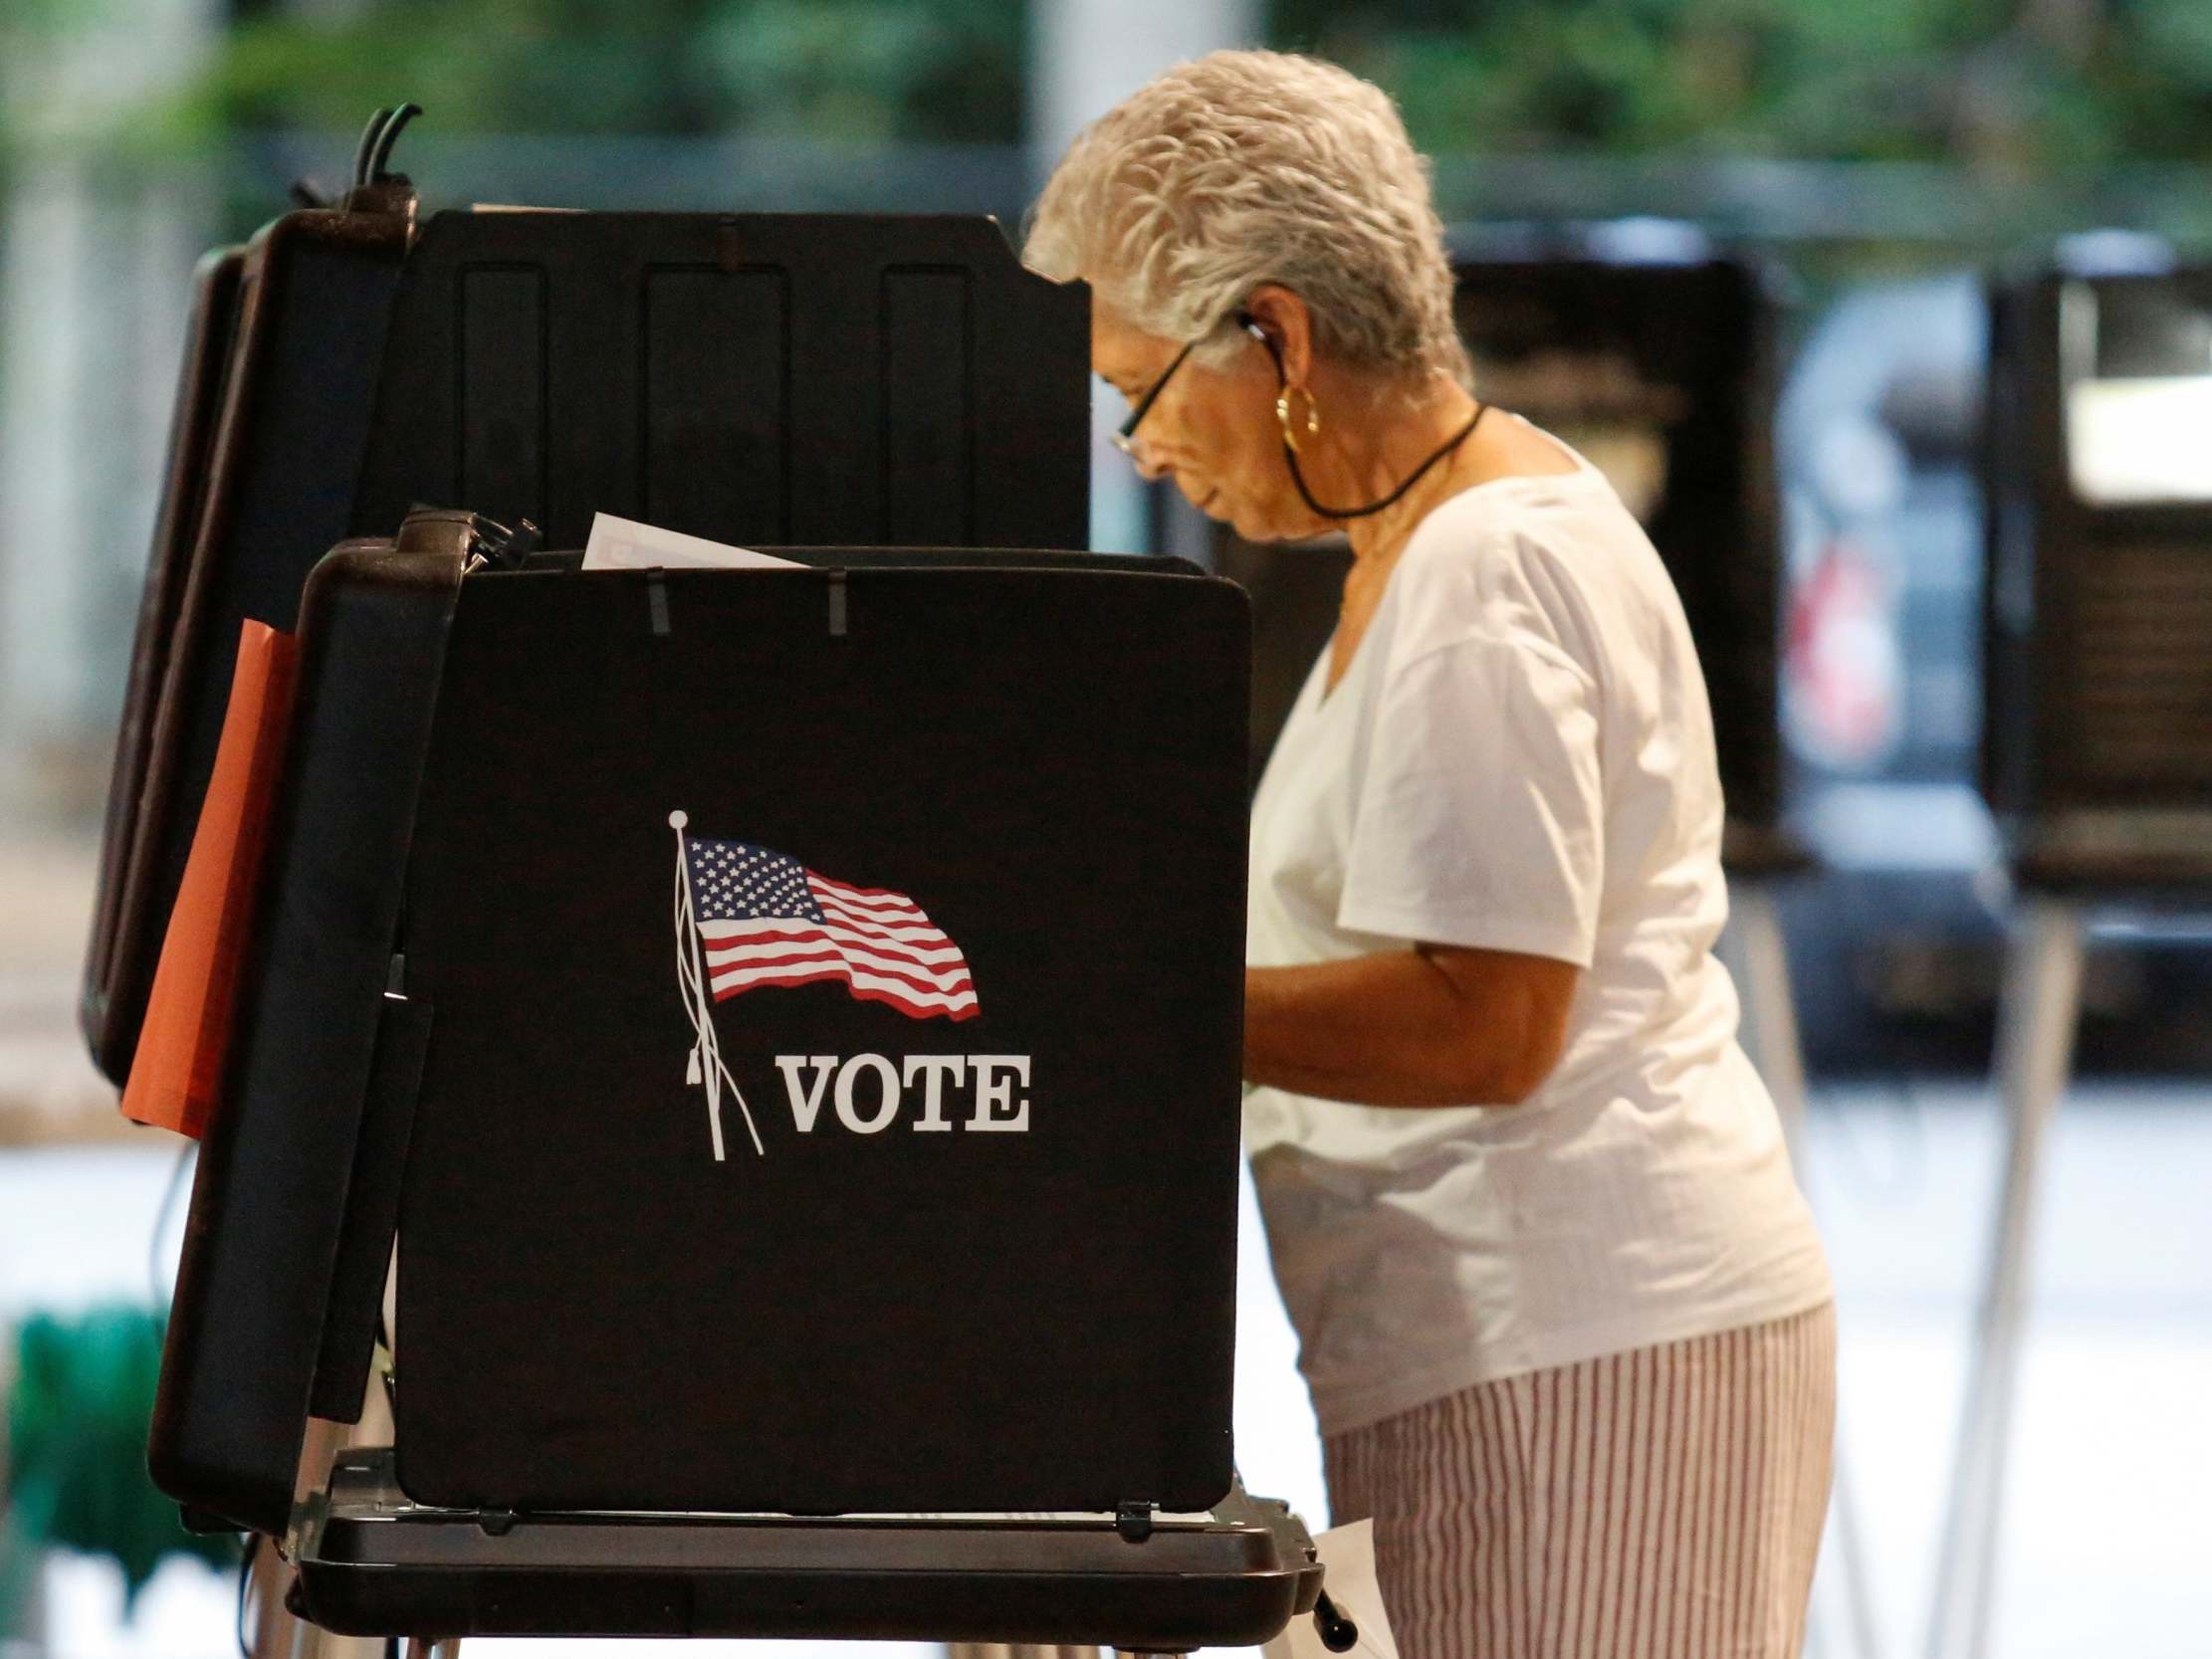 Voters headed to the polls on Tuesday but some polling stations in Florida were closed after volunteers pulled out on the back of cornavirus fears